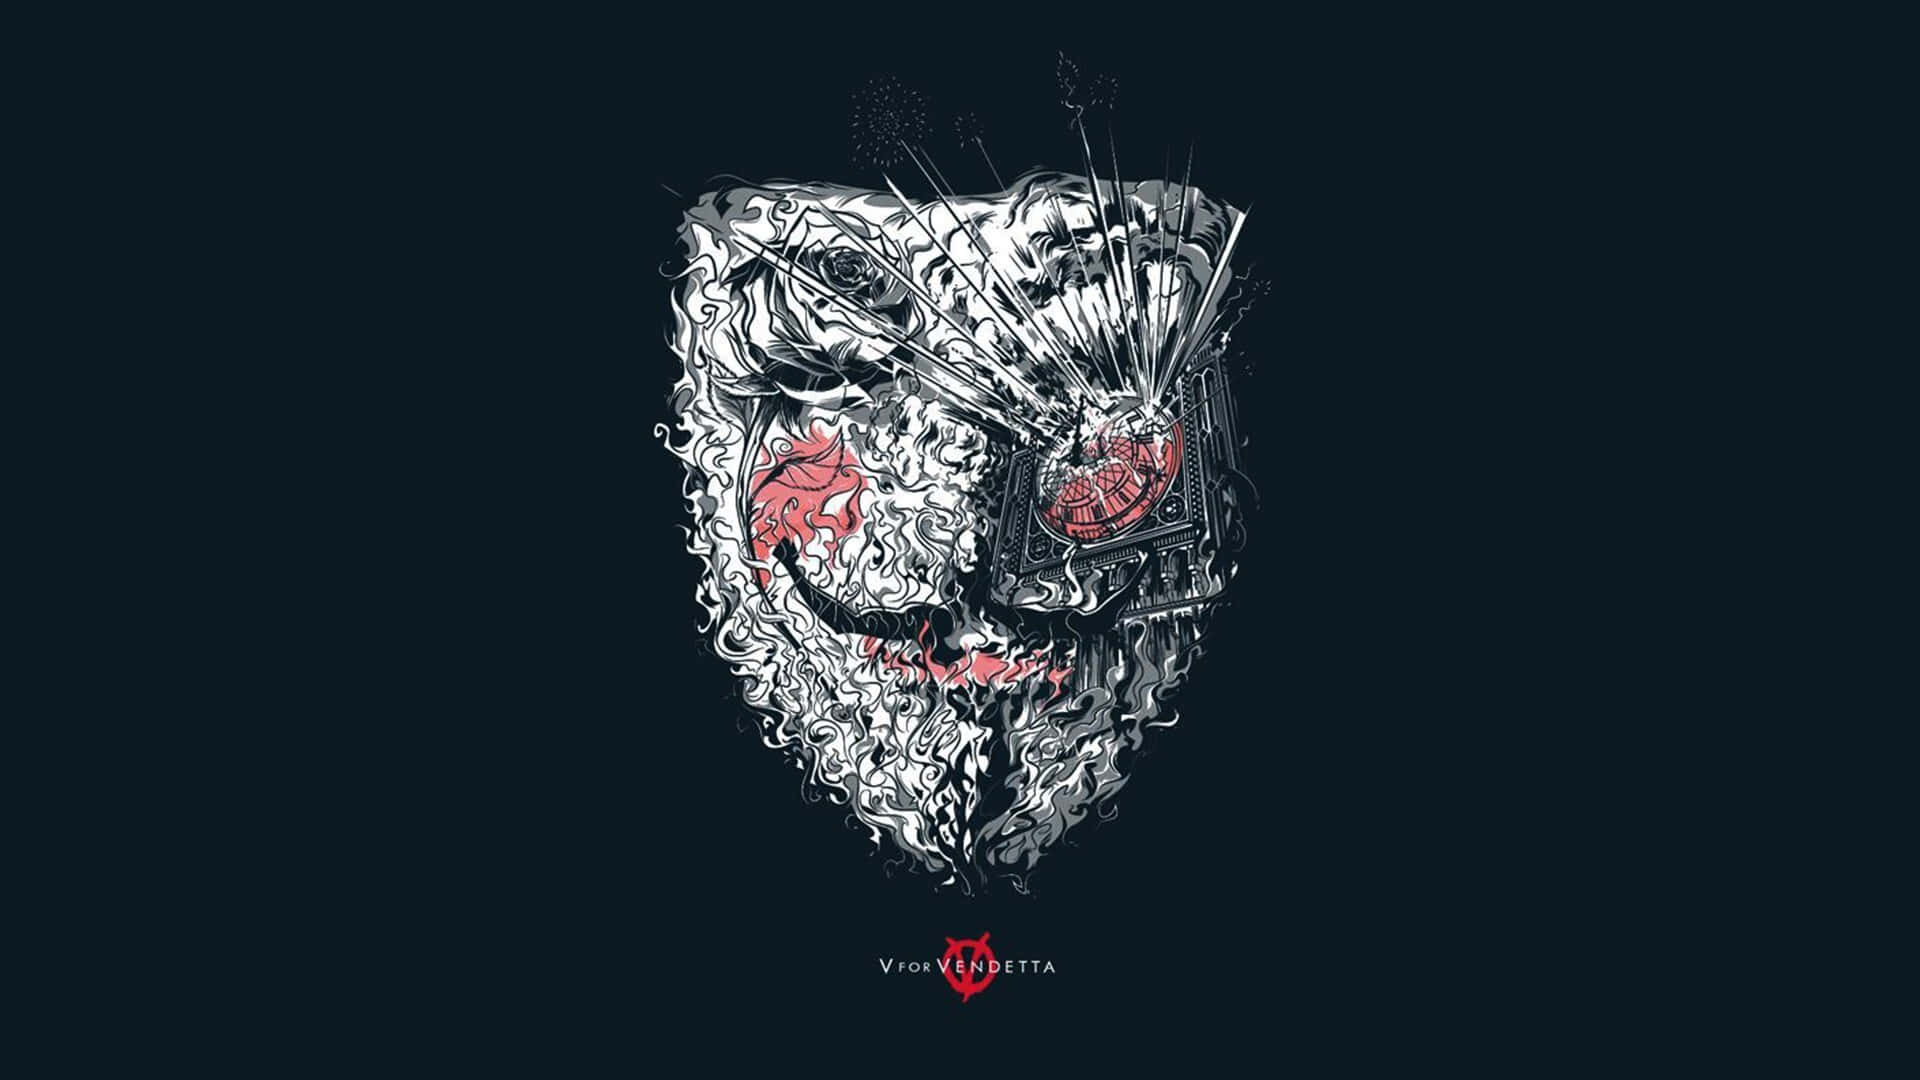 A Black And White Image Of A Mask With Red Eyes Wallpaper